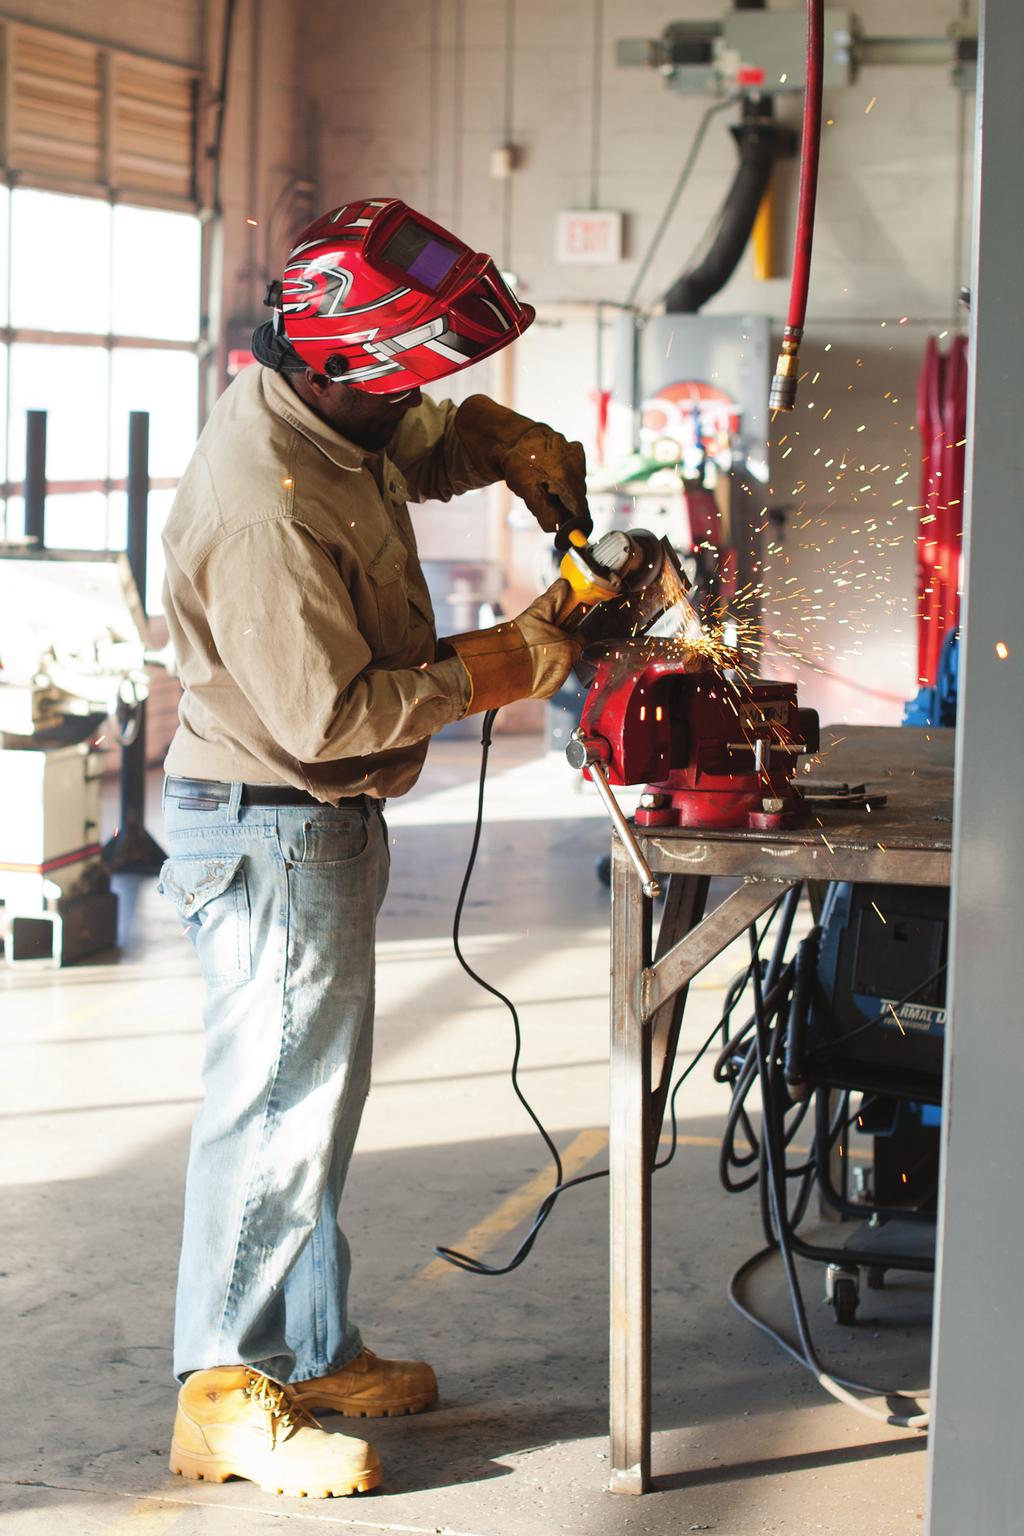 TRAIN The Welding Technology program at Oklahoma Technical College prepares you to excel in the welding industry.